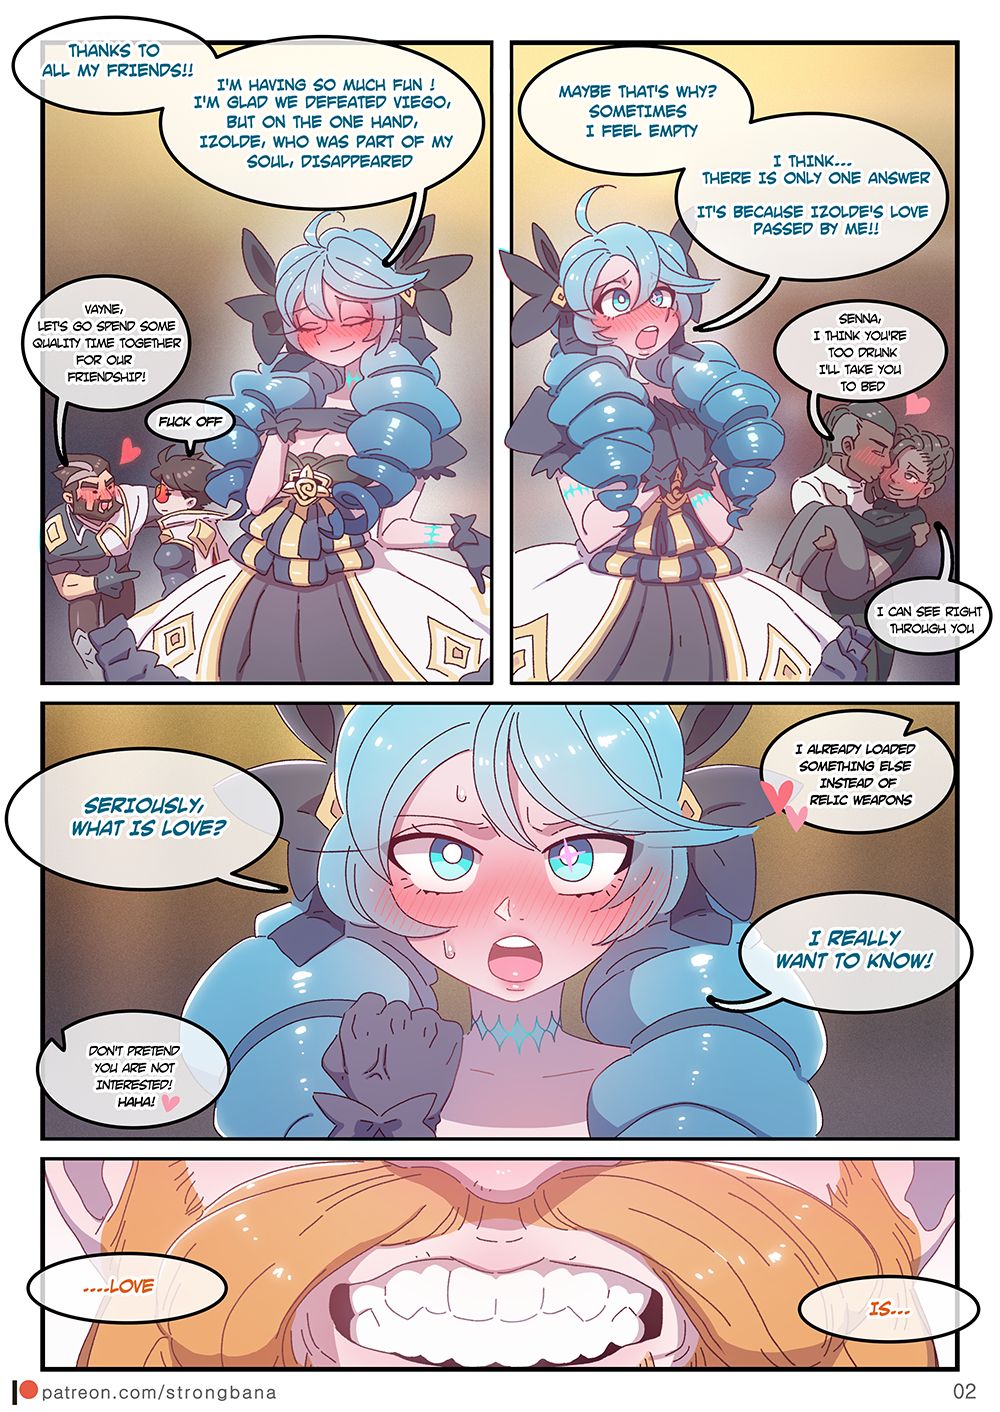 Strong Bana] TOO MUCH LOVE WILL FILL YOU | 18+ Porn Comics